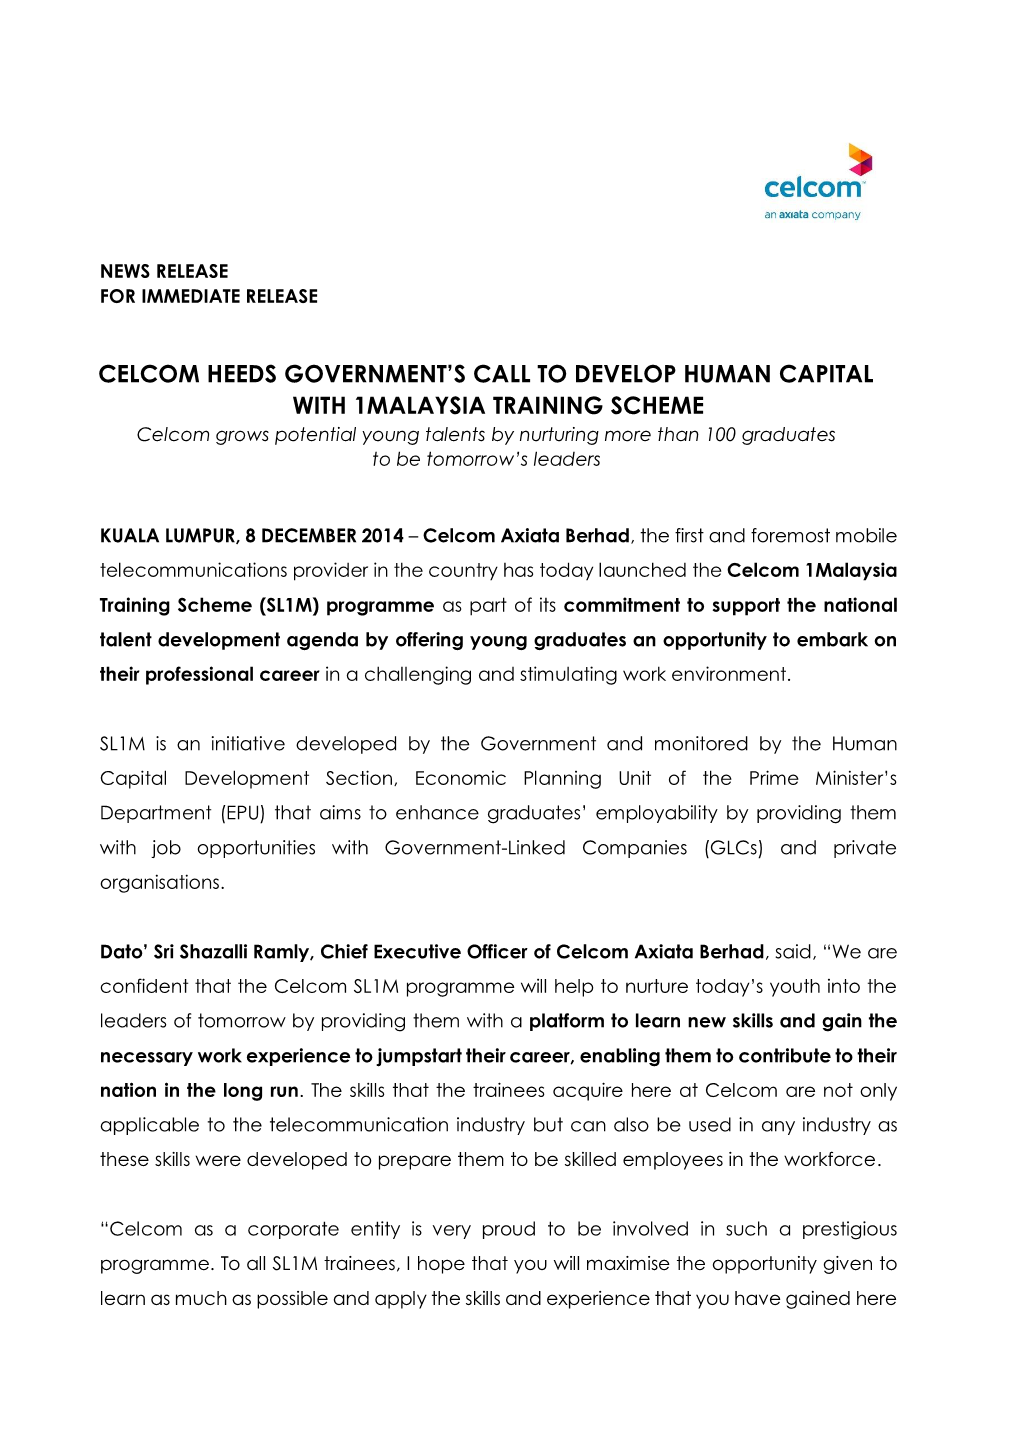 Celcom Heeds Government's Call to Develop Human Capital with 1Malaysia Training Scheme